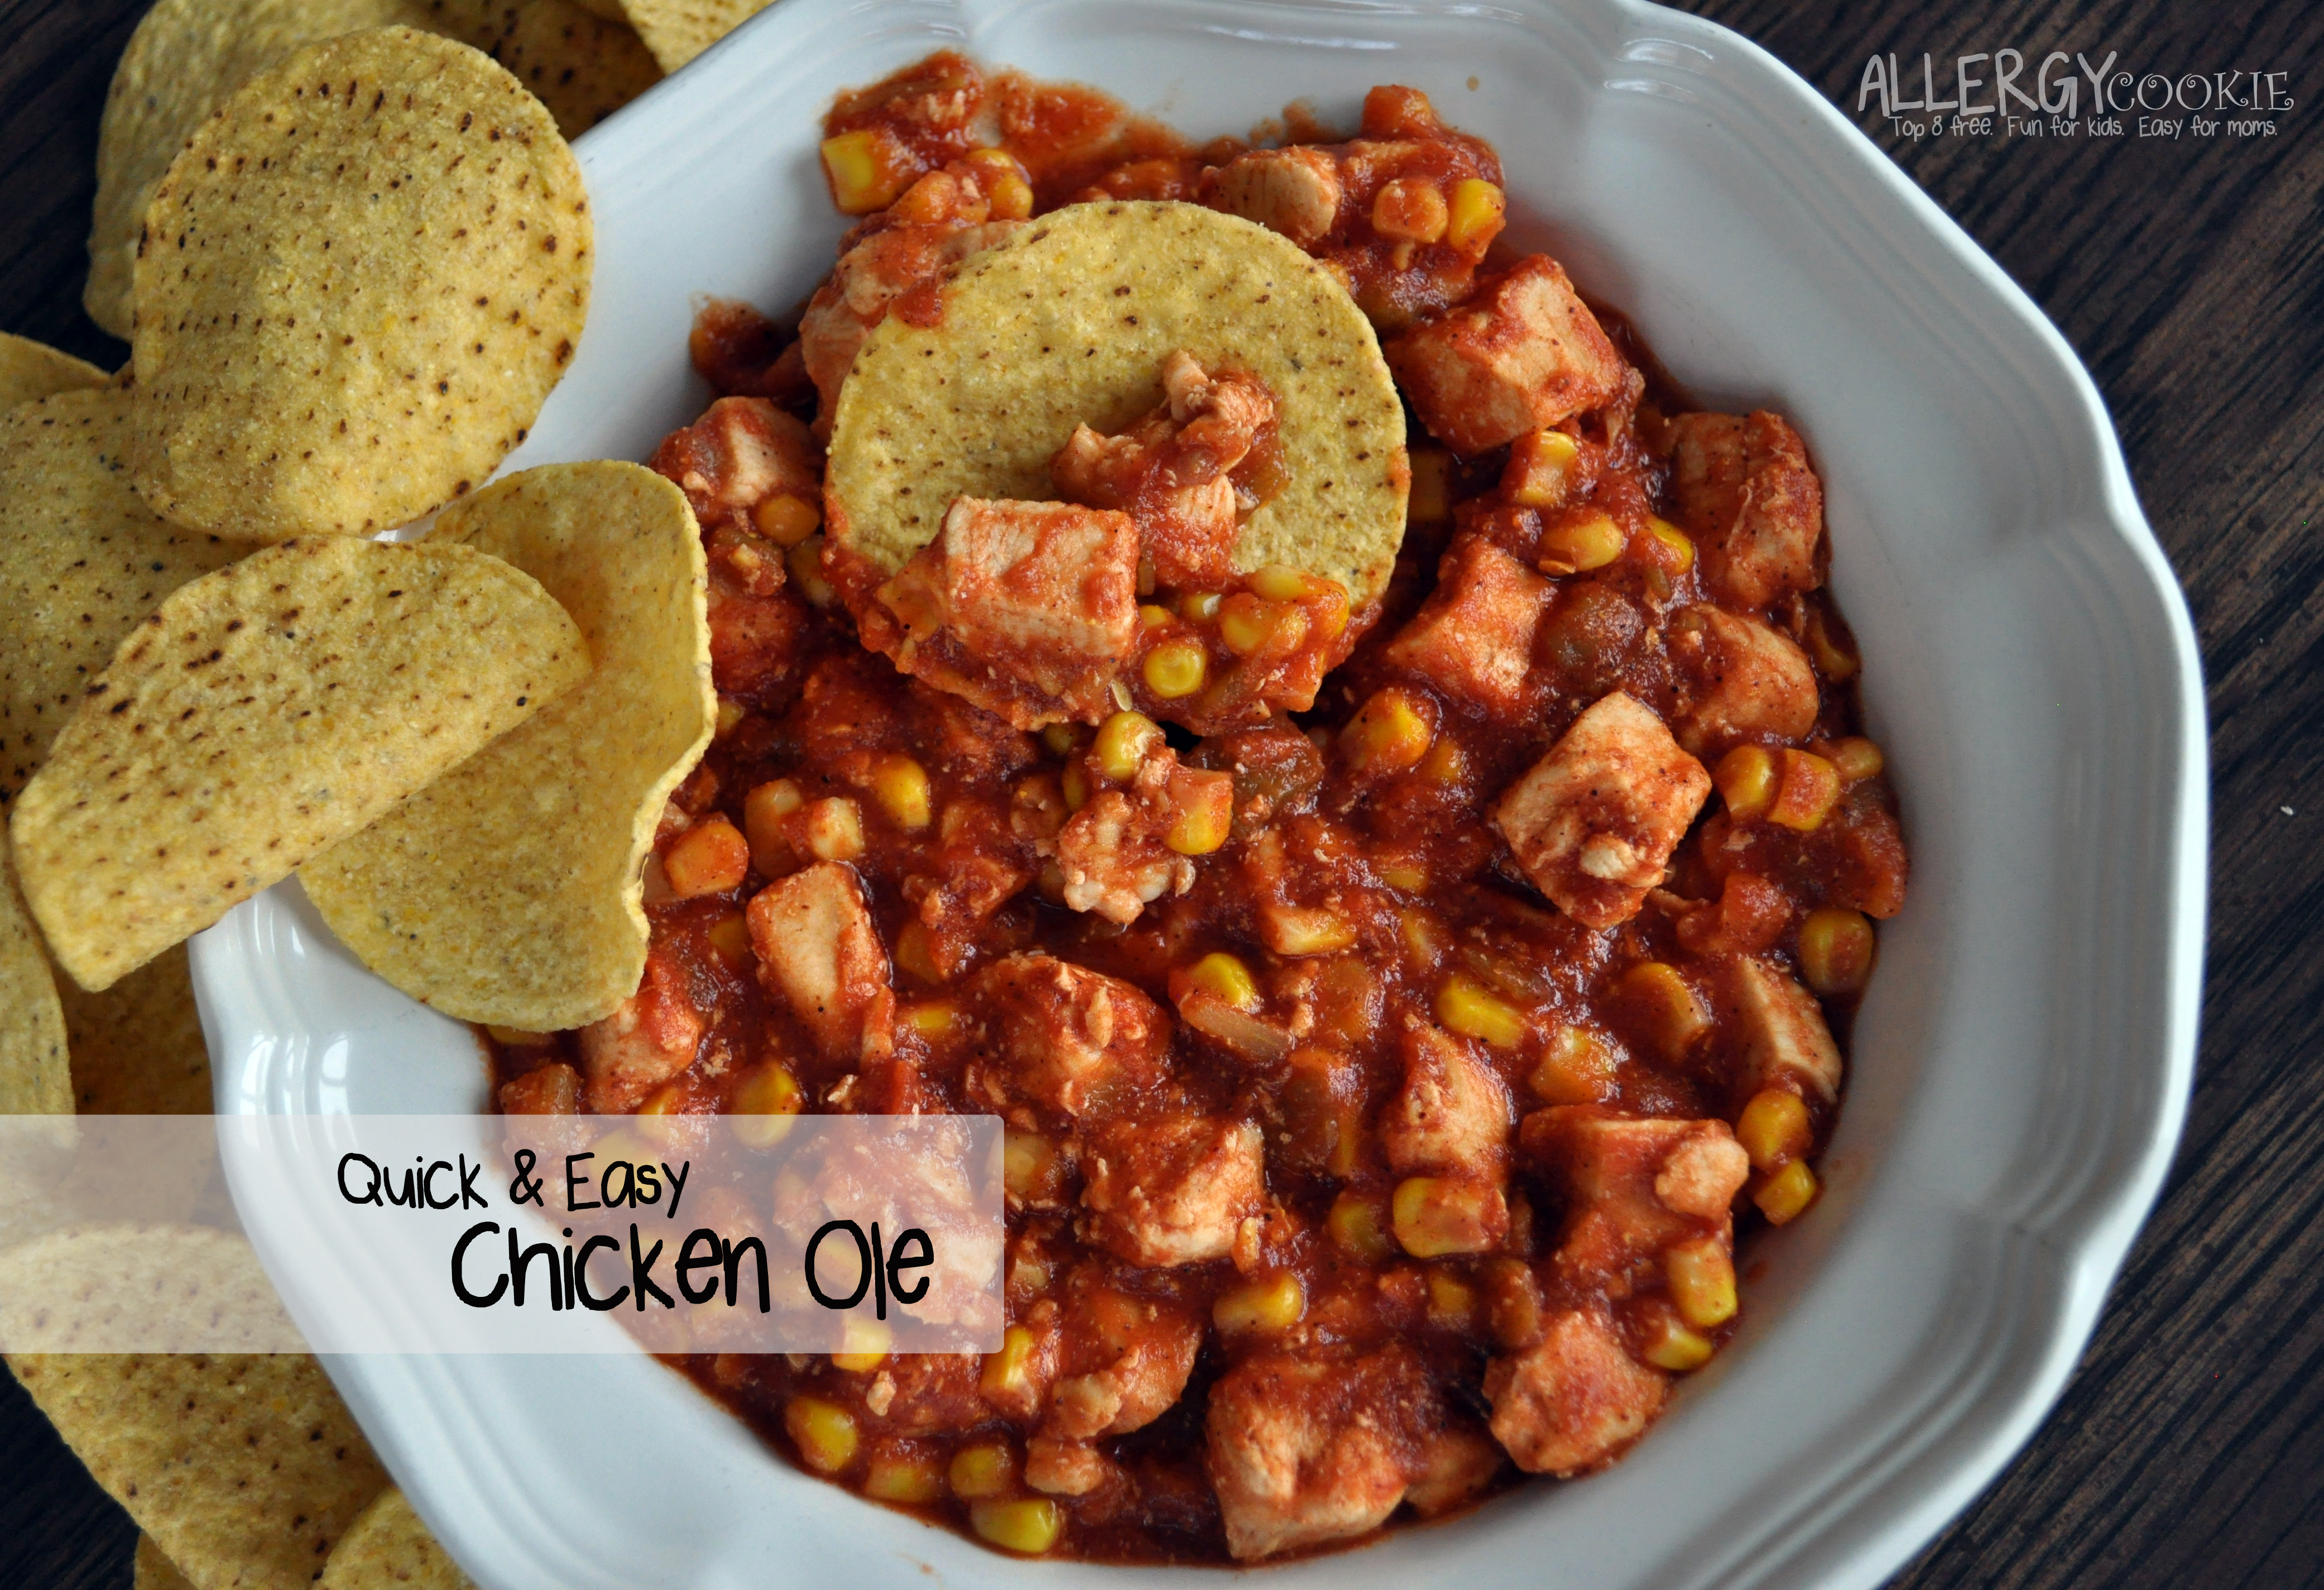 Quick and Easy Chicken Ole (gluten free, dairy free, top 8 free)